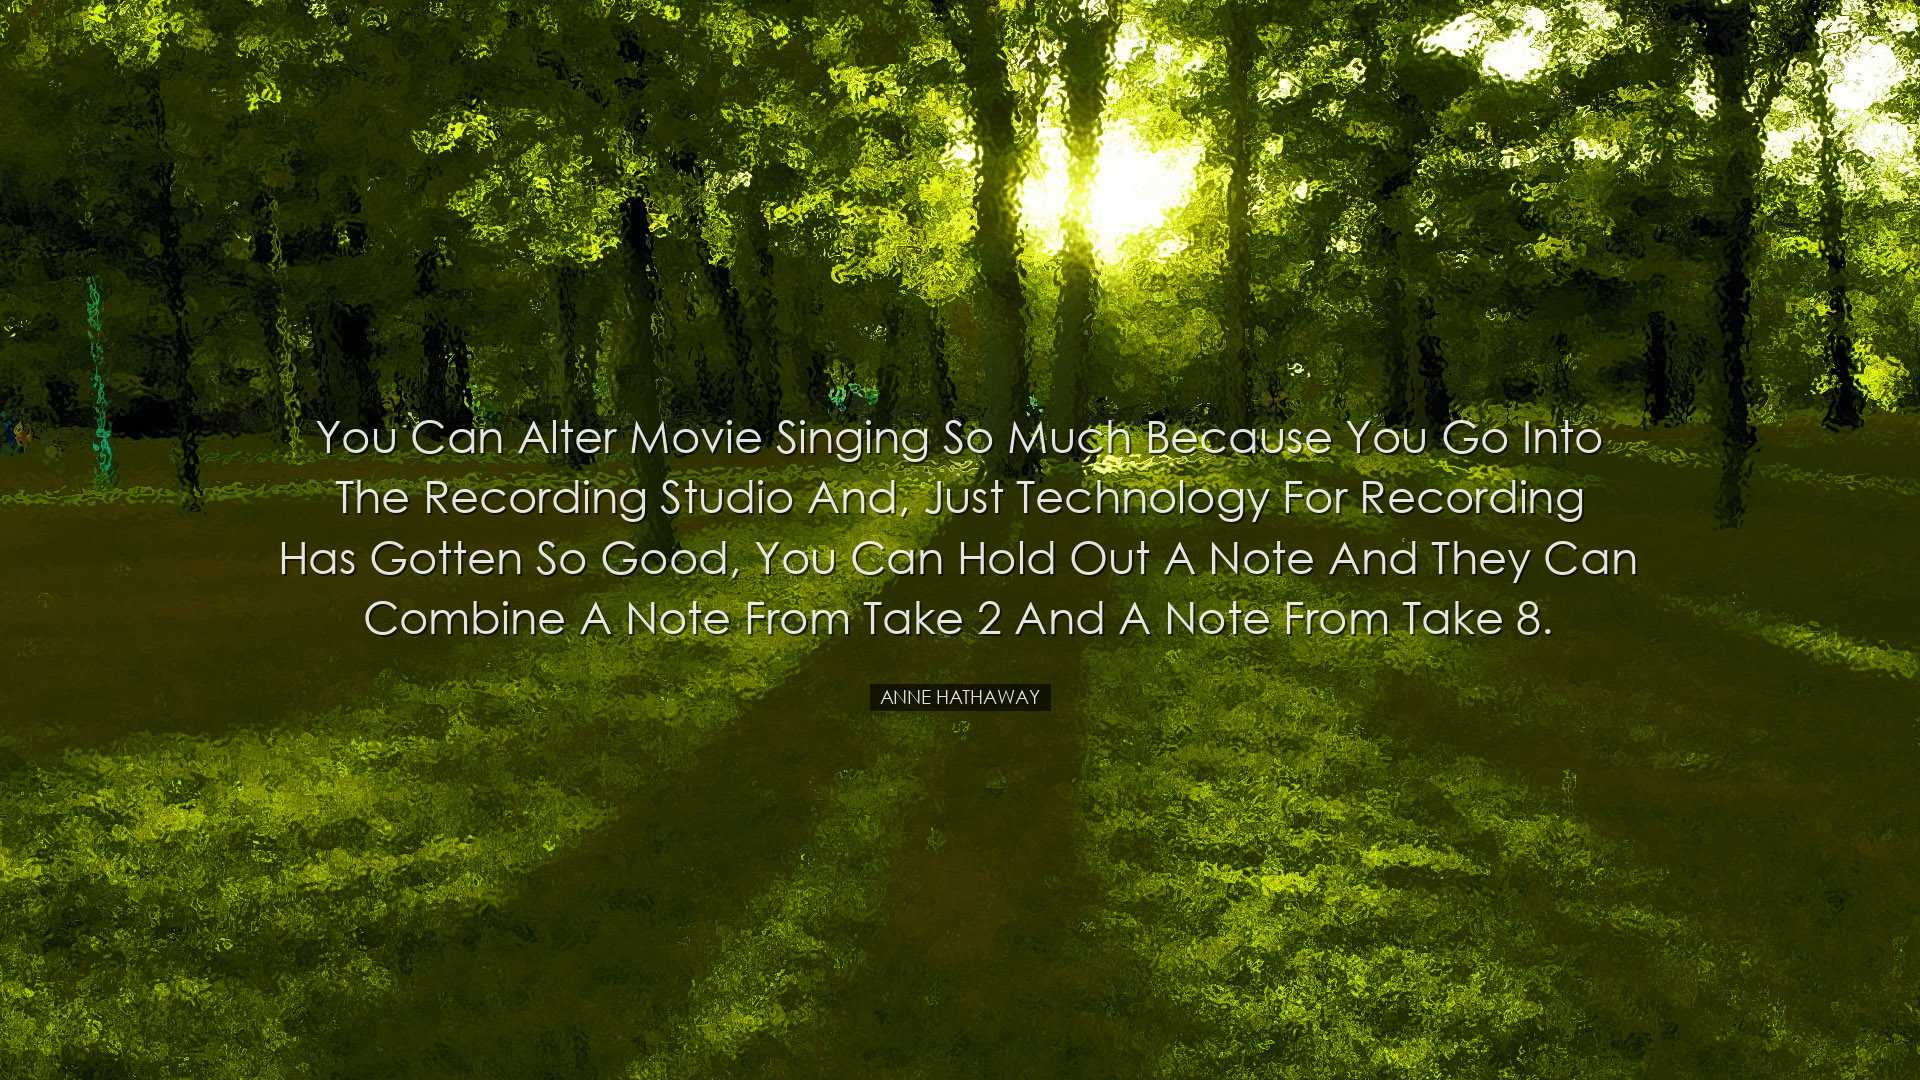 You can alter movie singing so much because you go into the record